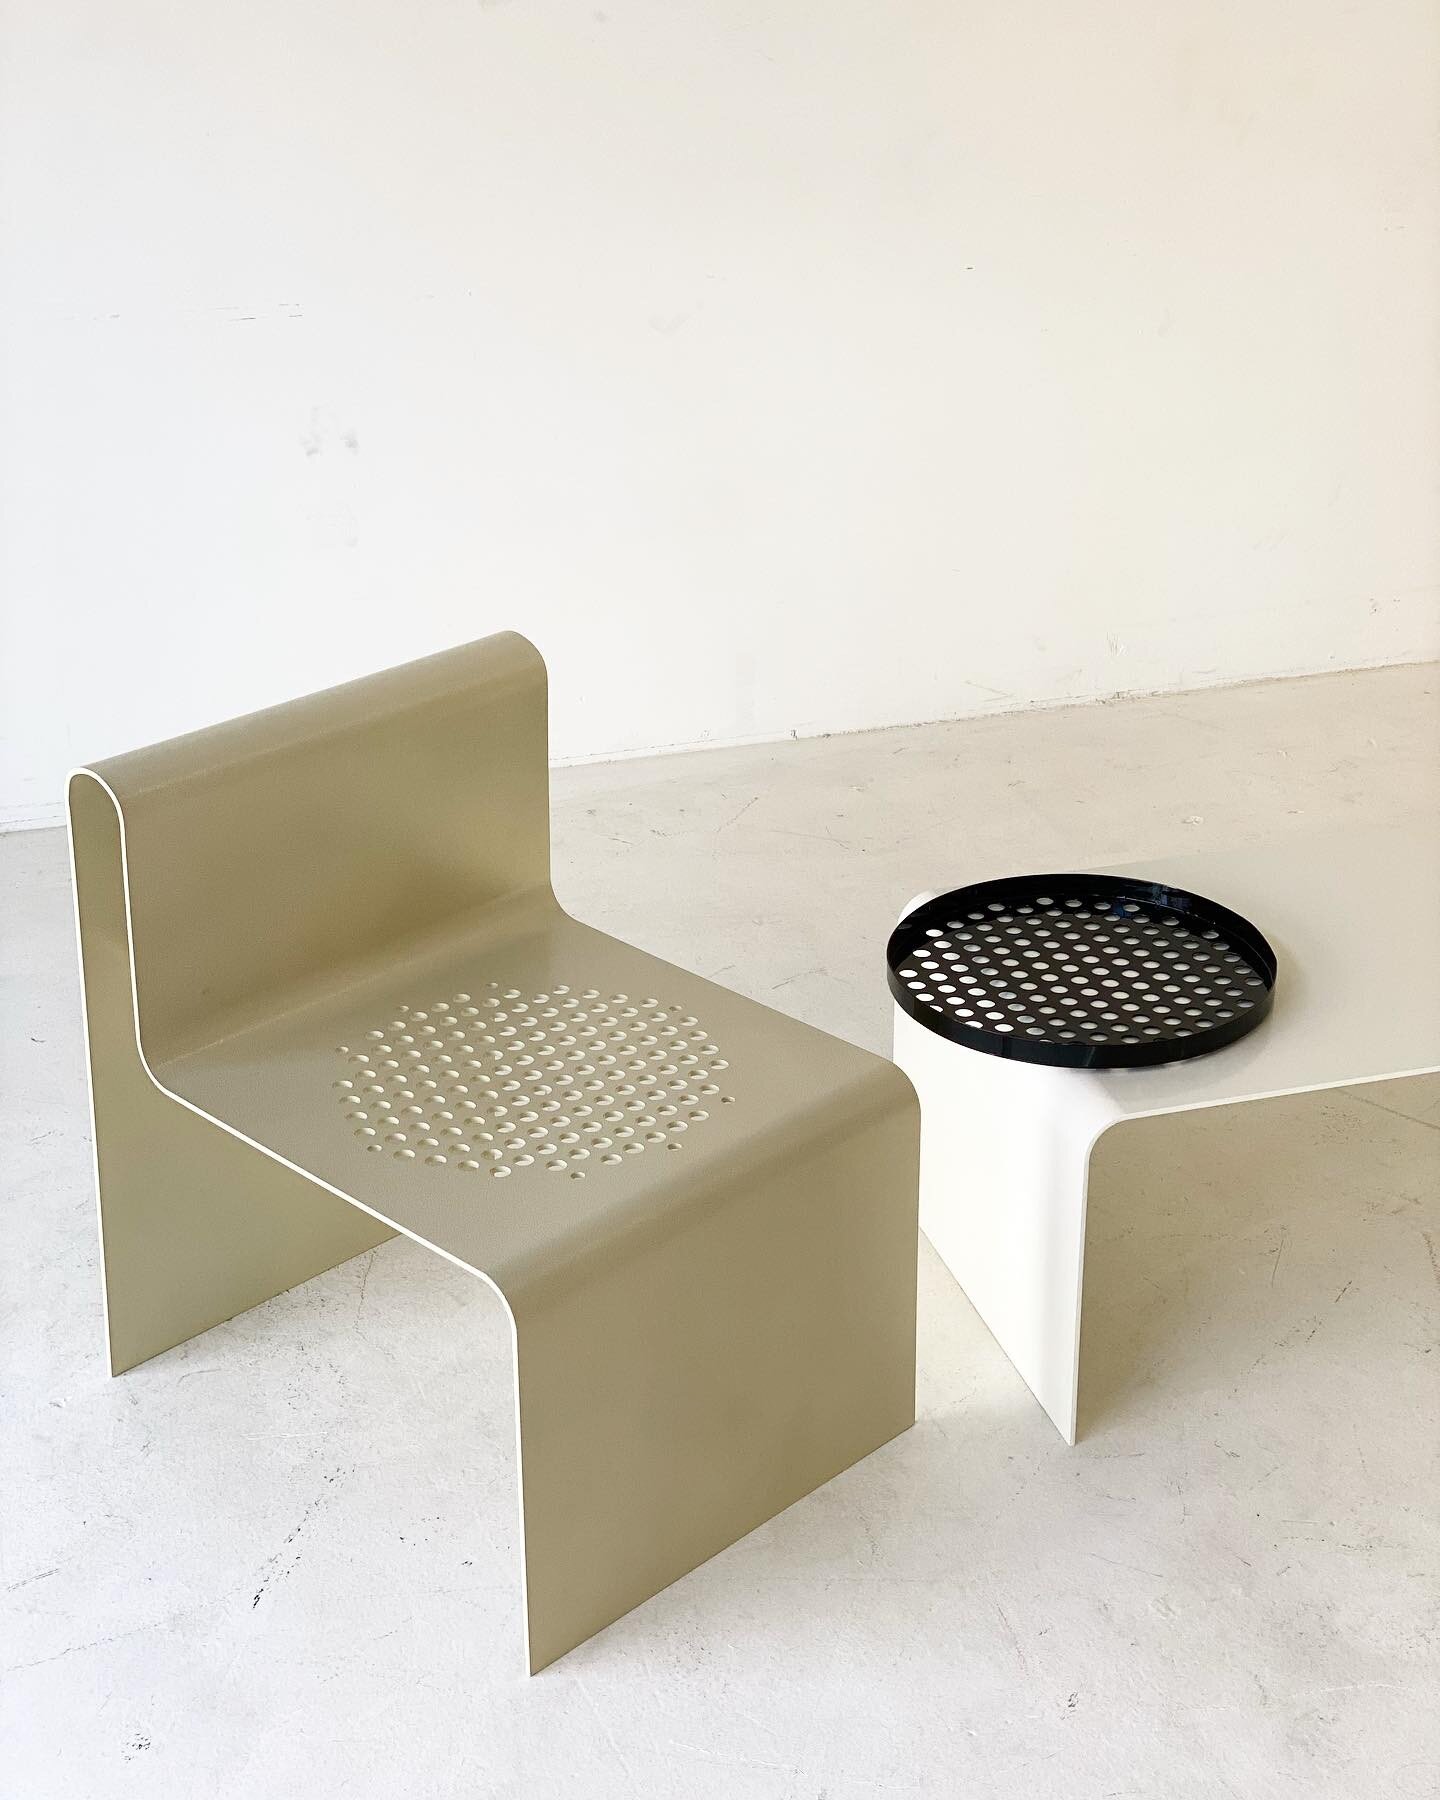 Our MoNO single arm chair with a perforated circular seat and made of lightweight aluminum, can be used indoors or outdoors.

And it pairs oh so nicely with our MoNO bench in white aluminum. With magnets invisibly embedded into the bench&rsquo;s alum